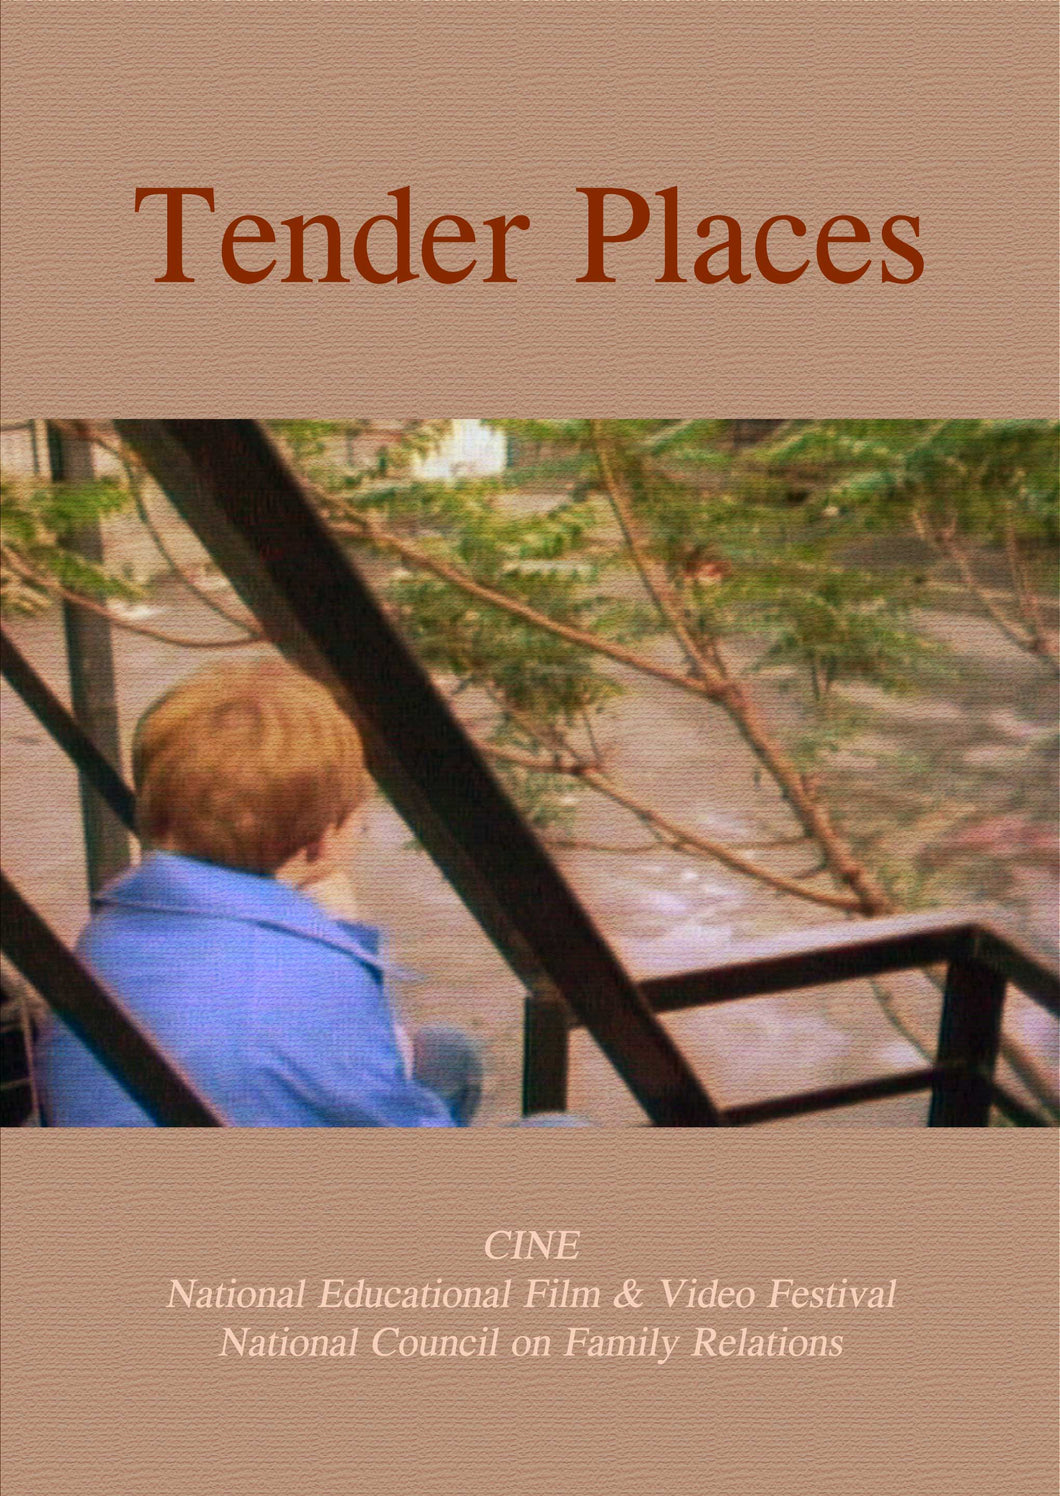 Tender Places